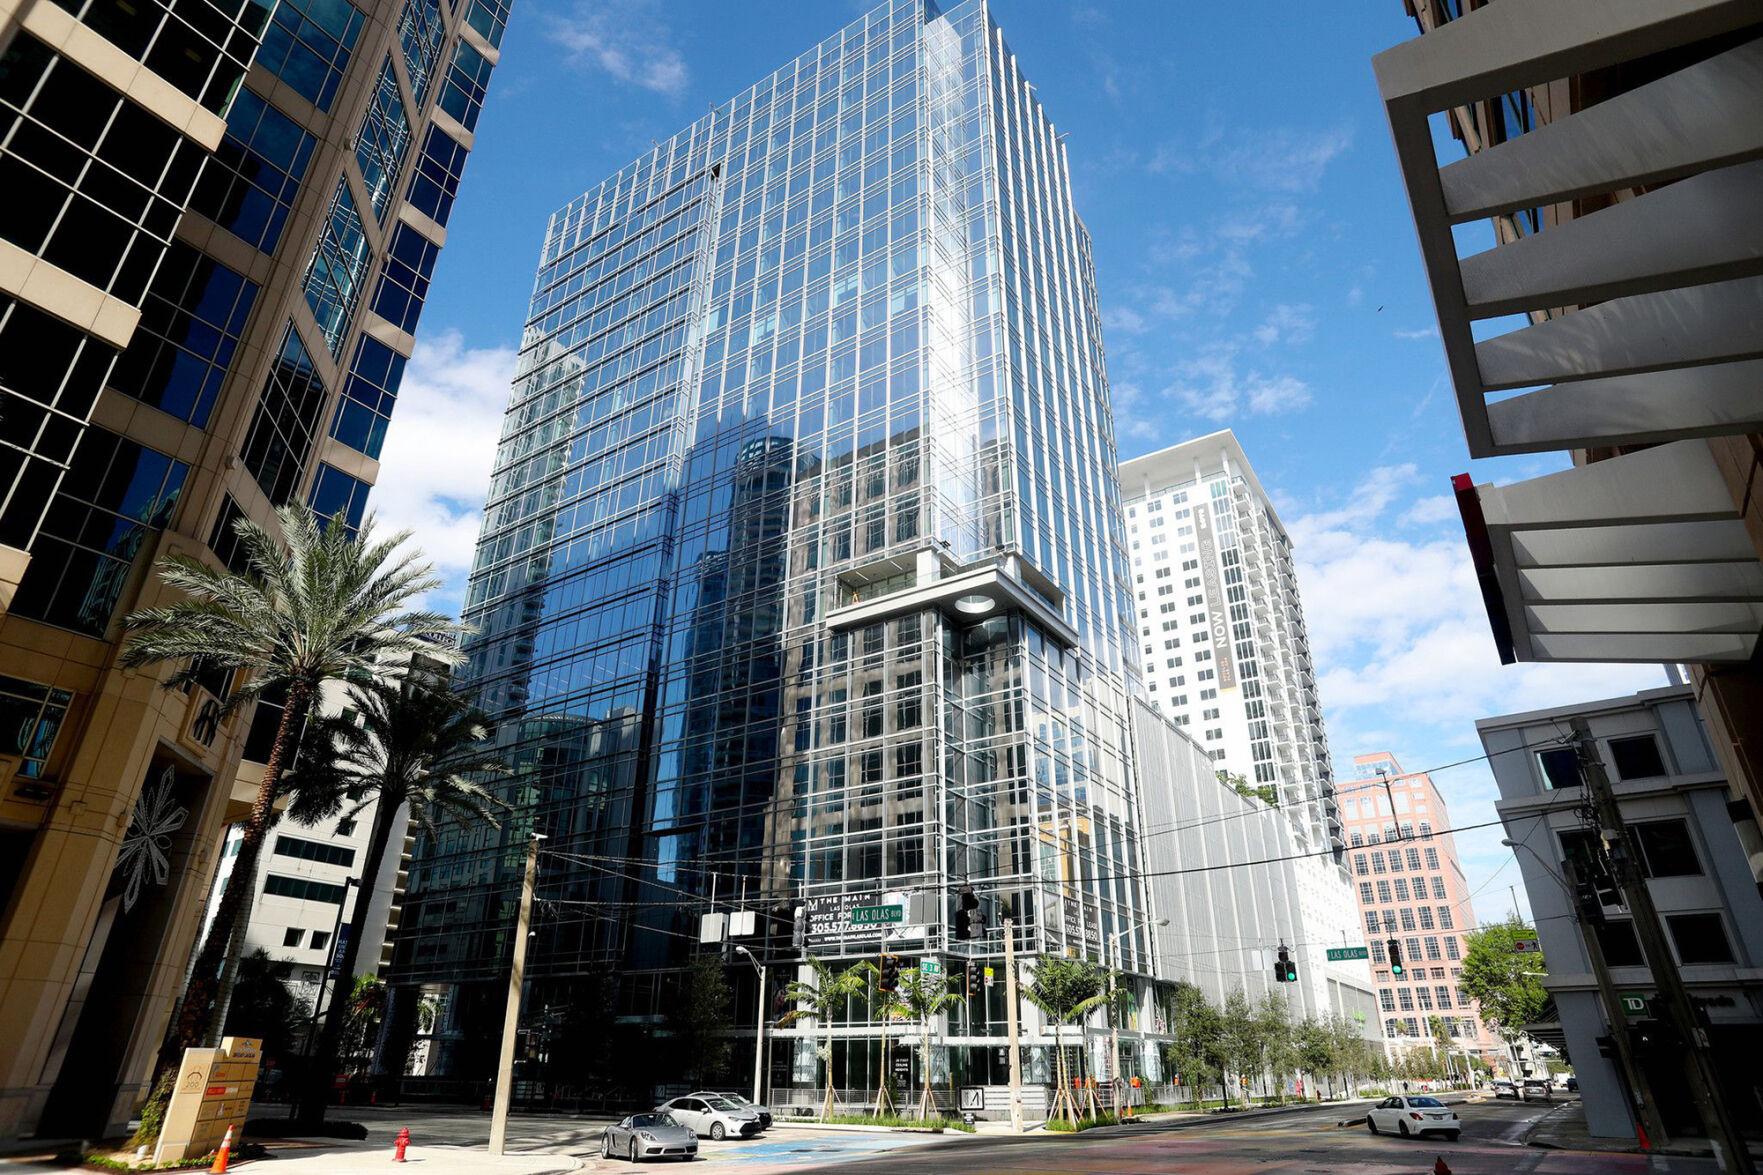 The Main Las Olas, a 1.4 million-square-foot building in the center of Fort Lauderdale